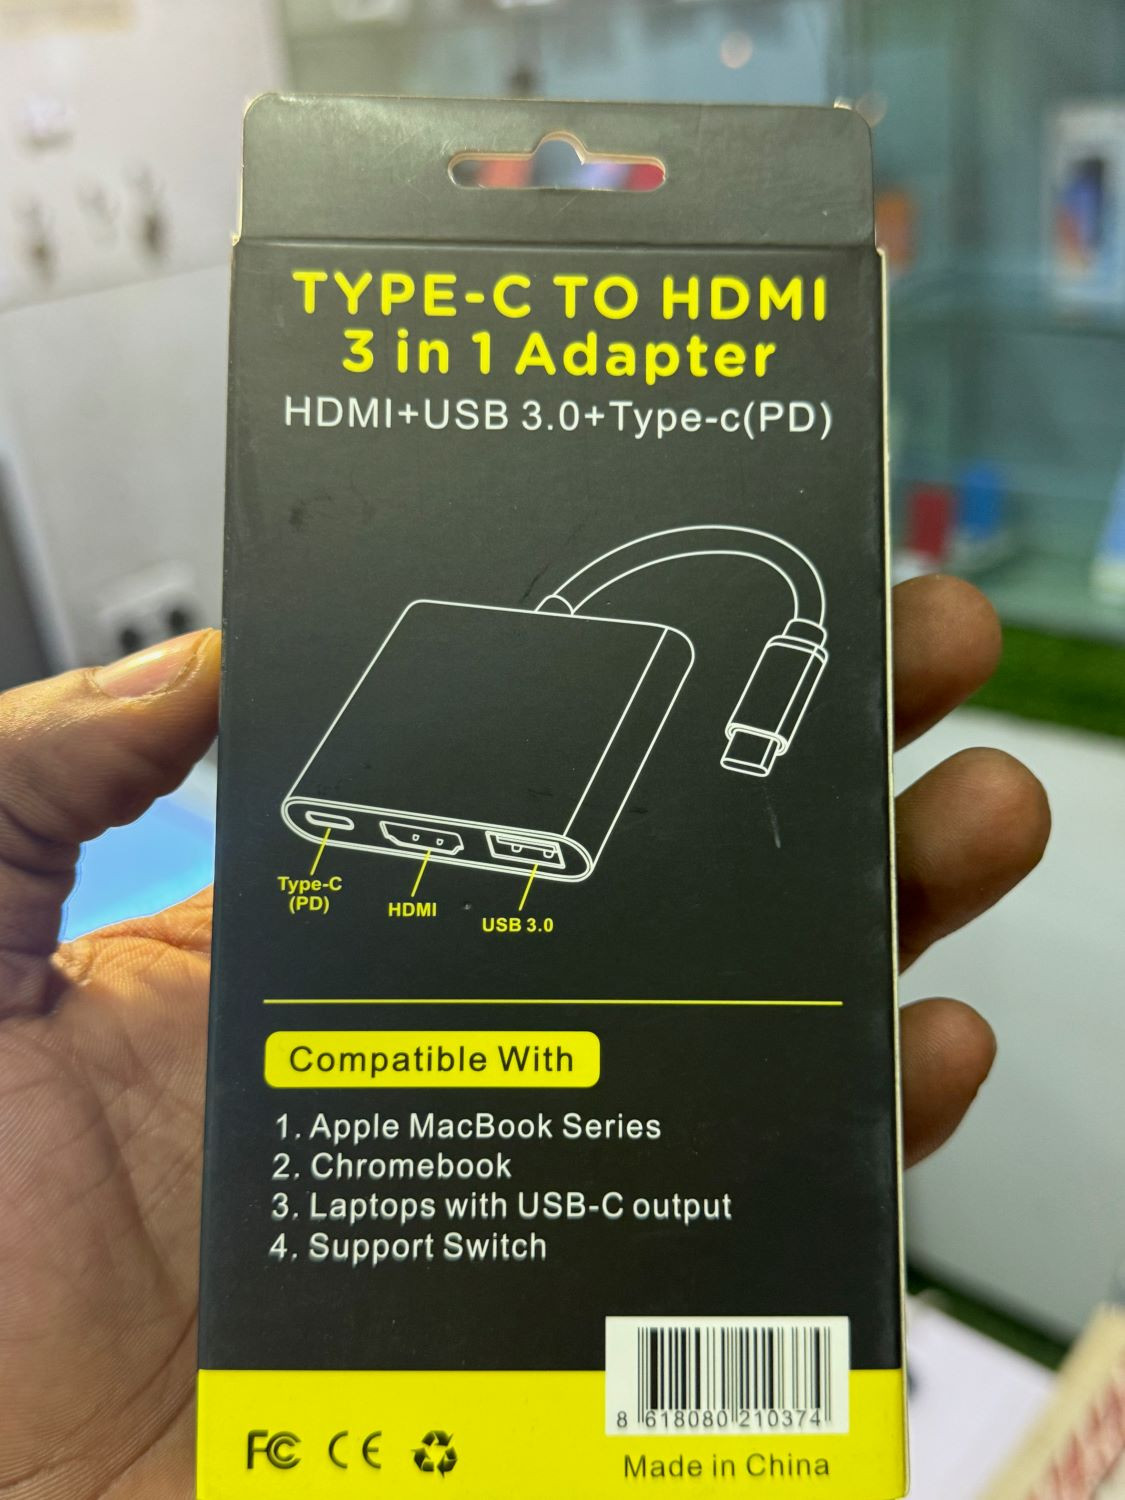 Type-C to HDMI | 3 in 1 Adapter